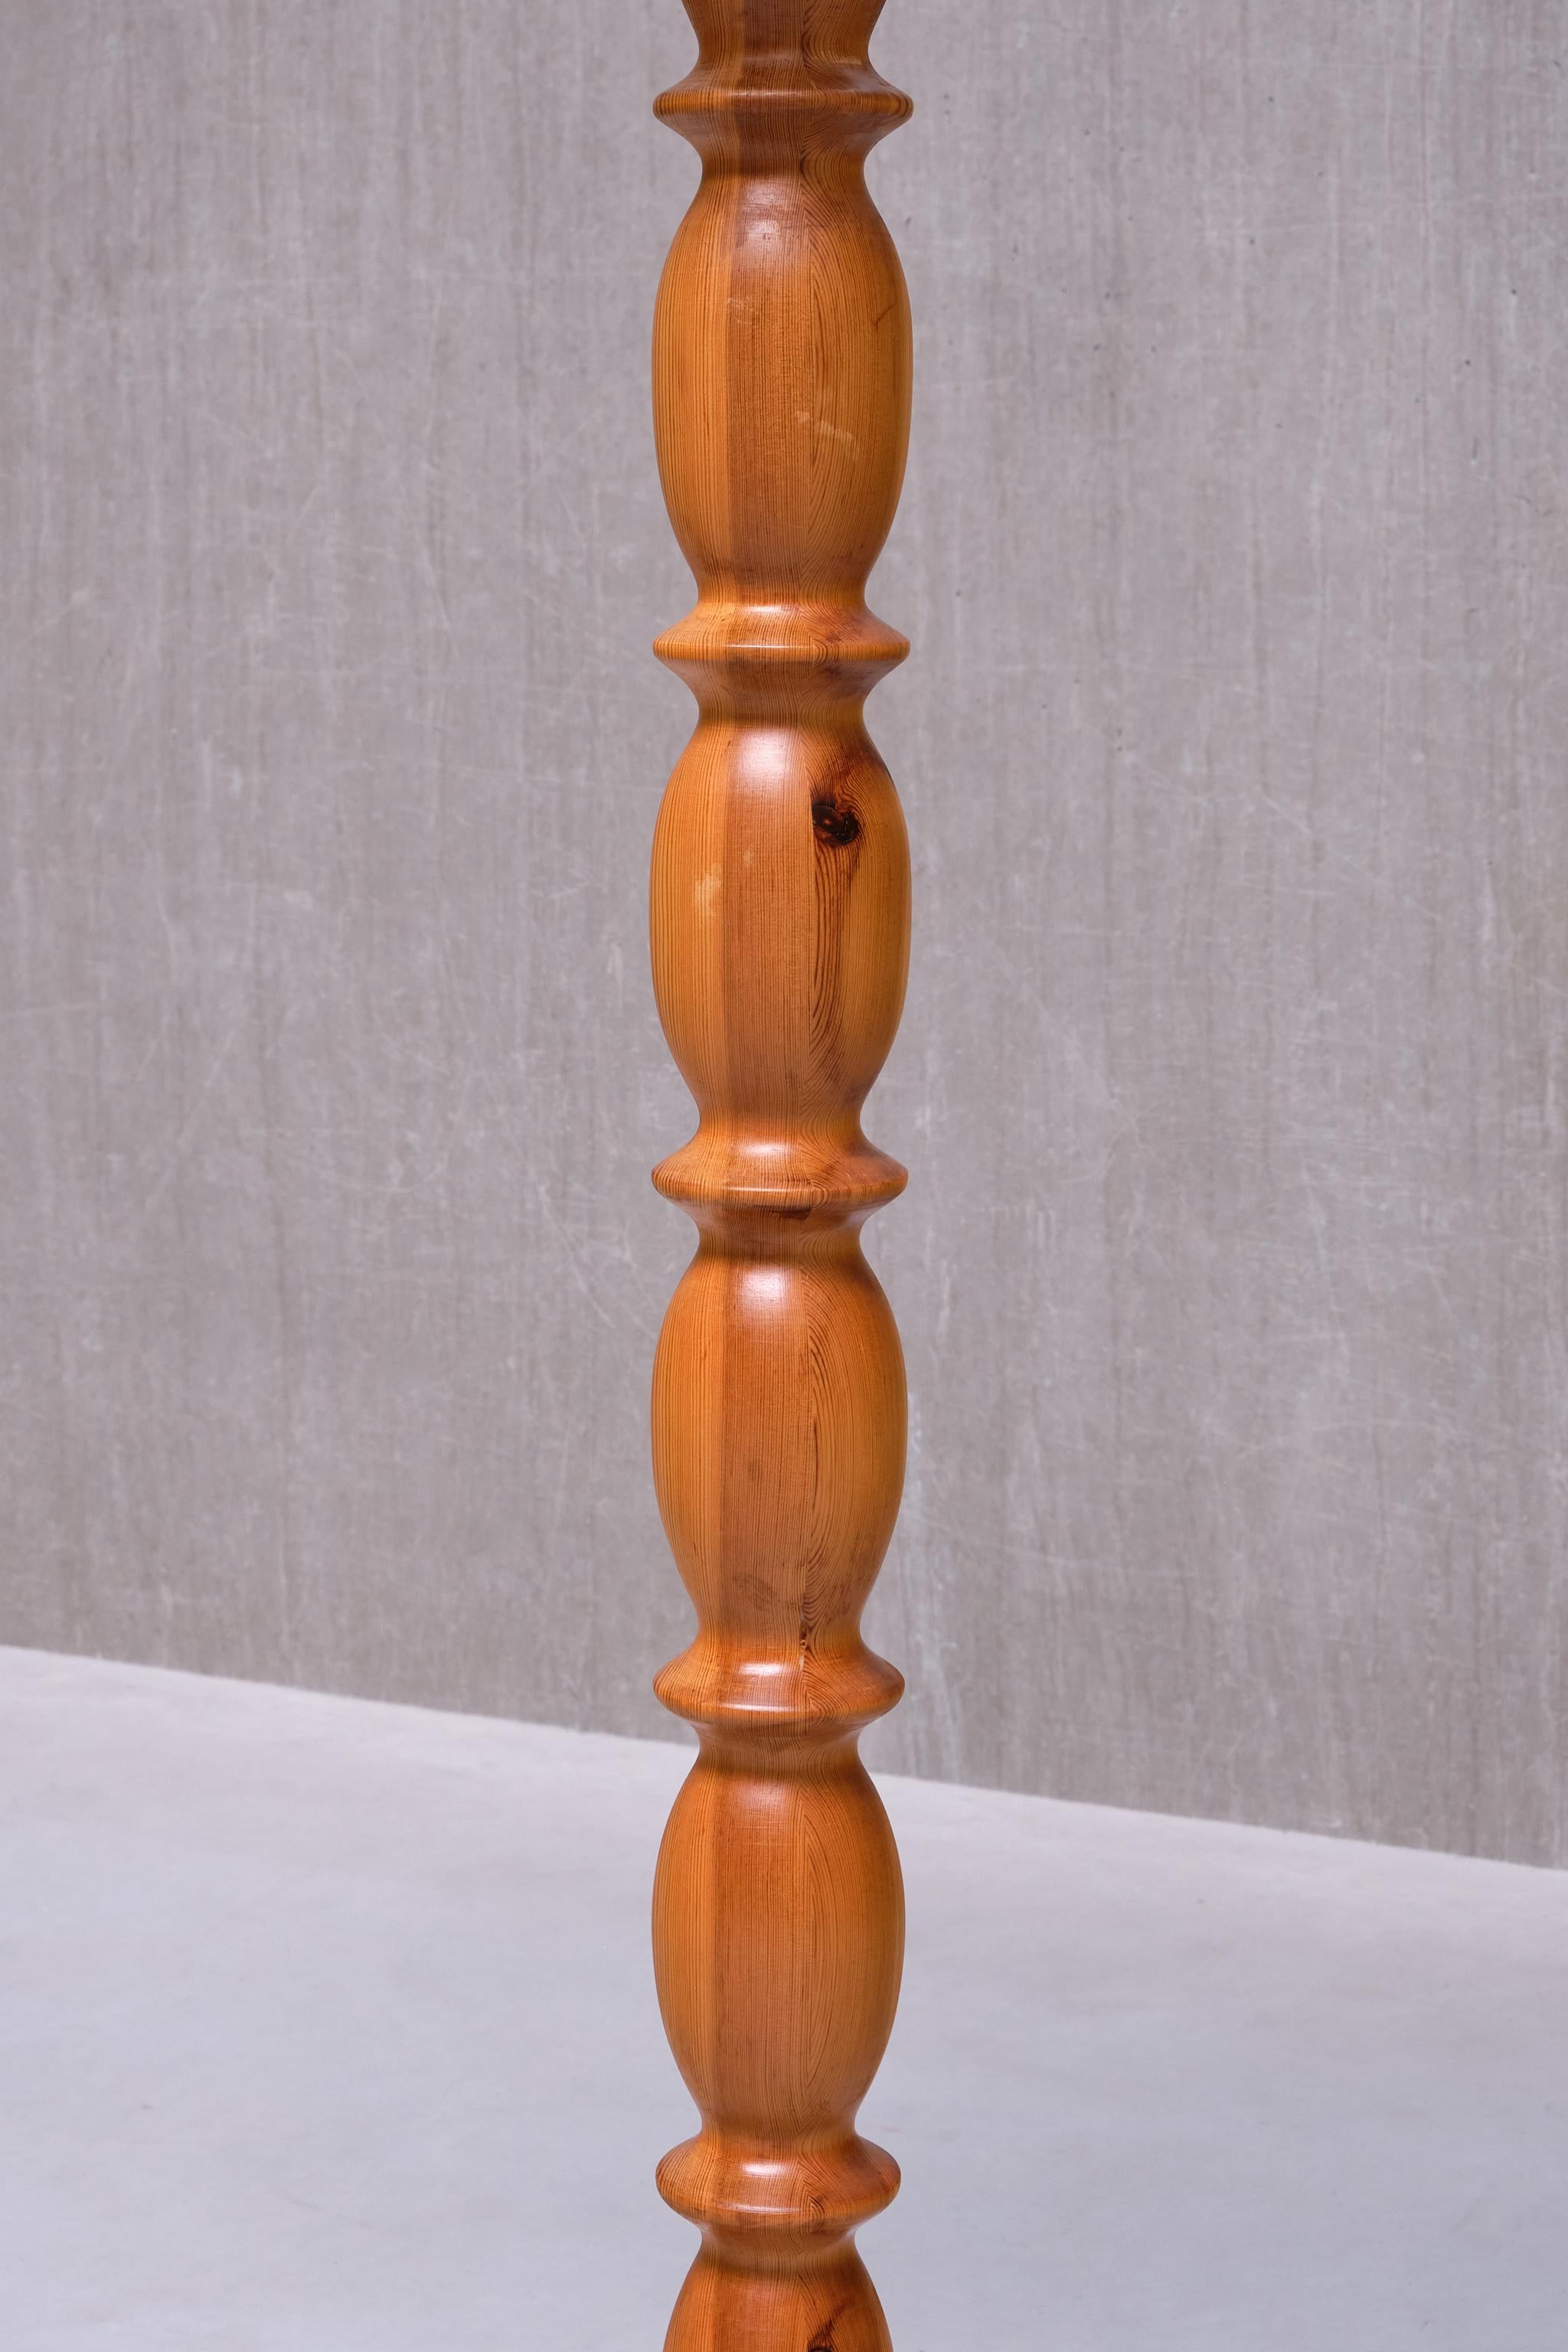 Mid-20th Century Swedish Modern Floor Lamp in Carved Solid Pine Wood, 1960s For Sale